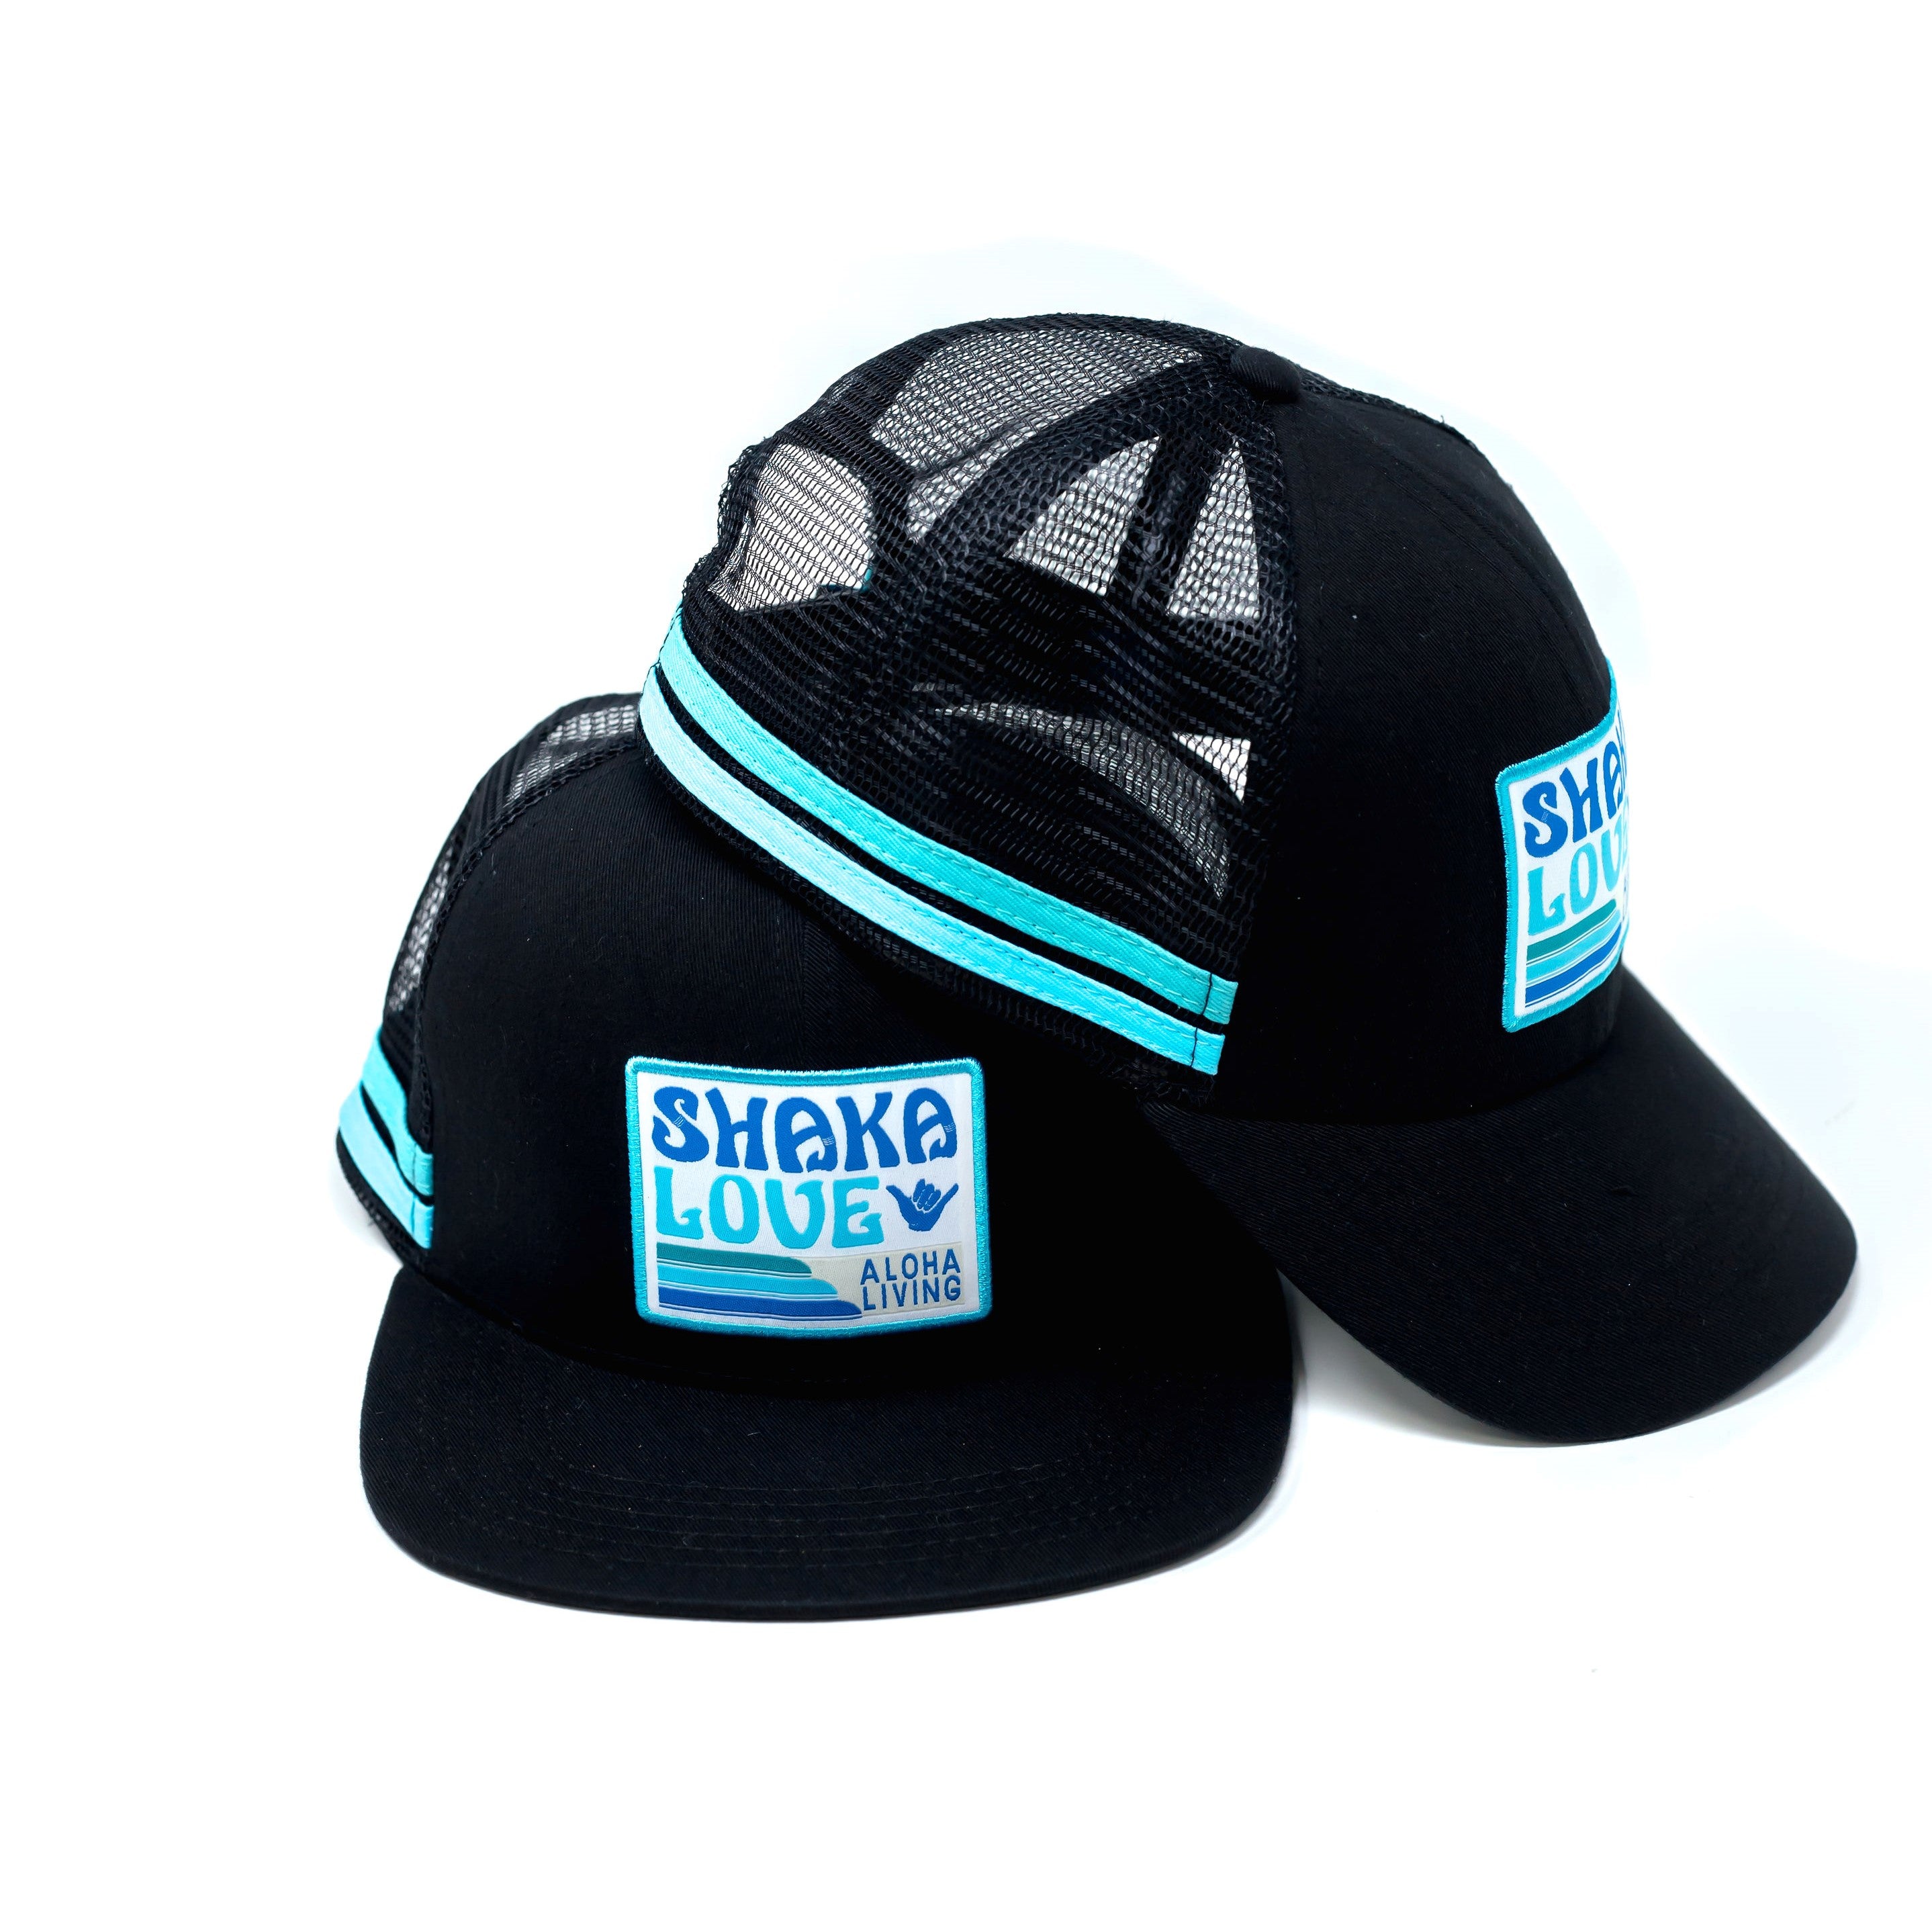 Bundle #5: Includes 2 Eco Surf Hats of Your Choice